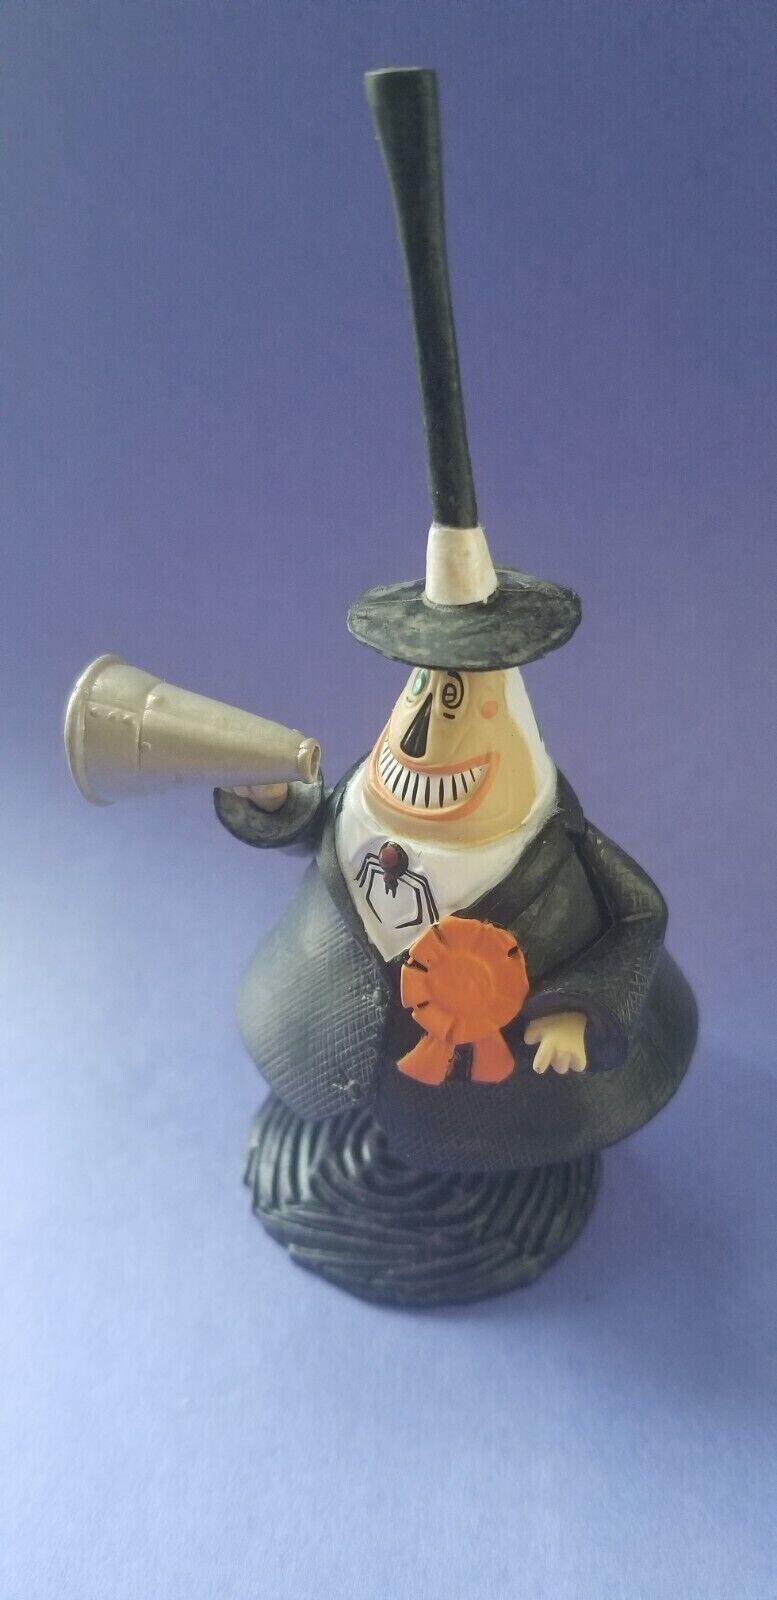 The Nightmare Before Christmas The Mayor Cake Topper Play Figure